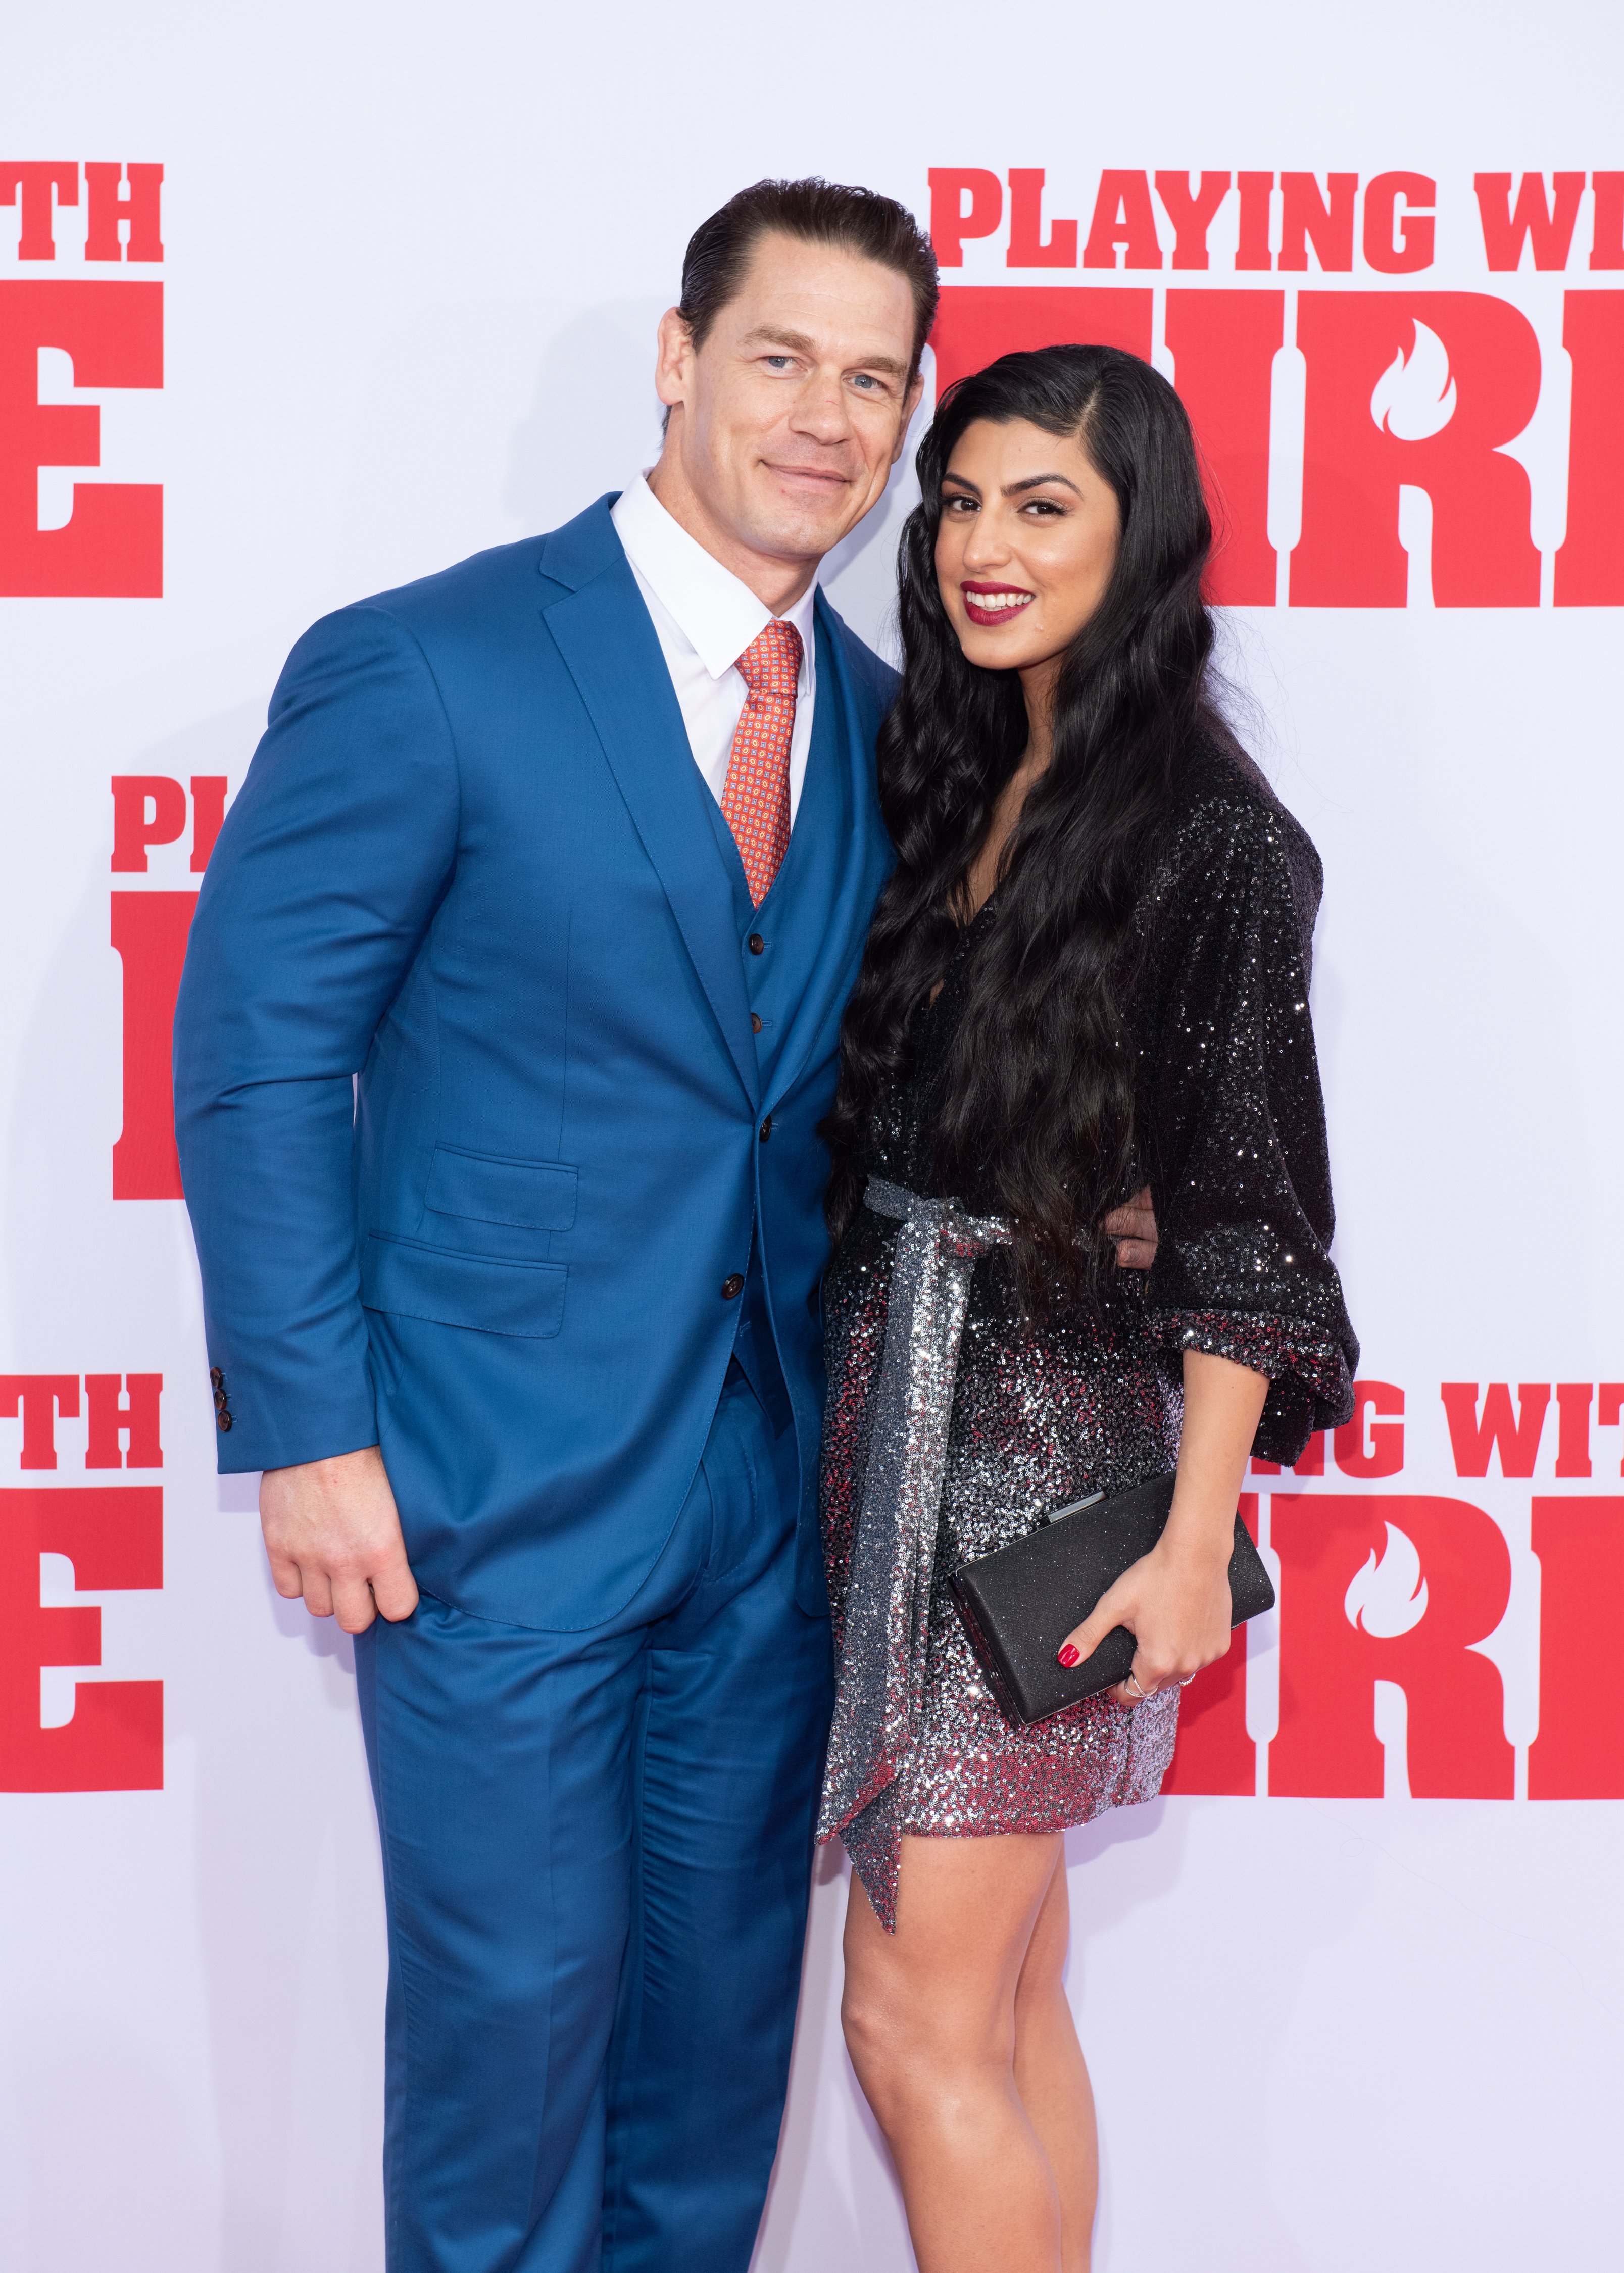 John Cena and Shay Shariatzadeh attend the "Playing With Fire" New York premiere at AMC Lincoln Square Theater on October 26, 2019, in New York City. | Source: Getty Images.